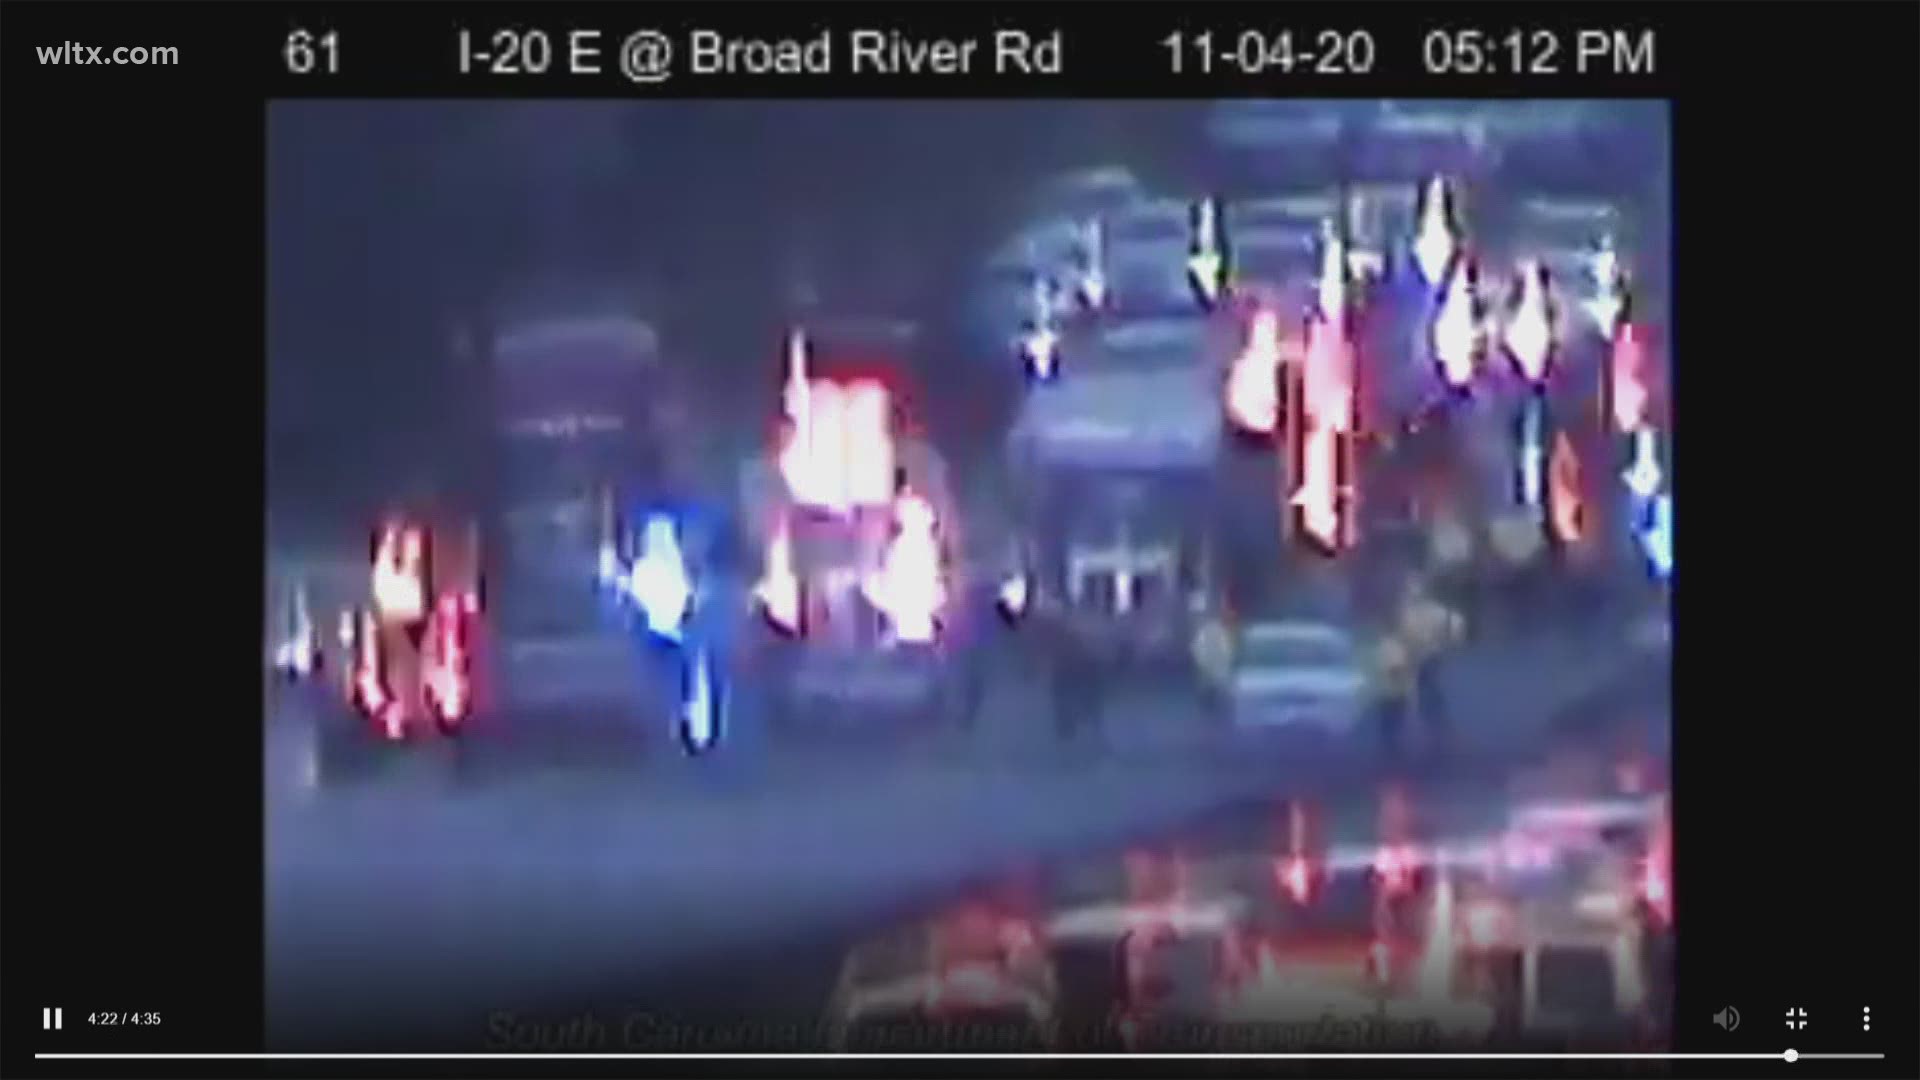 An accident has shut down all lanes of eastbound and westbound traffic on I-20 near Broad River Road